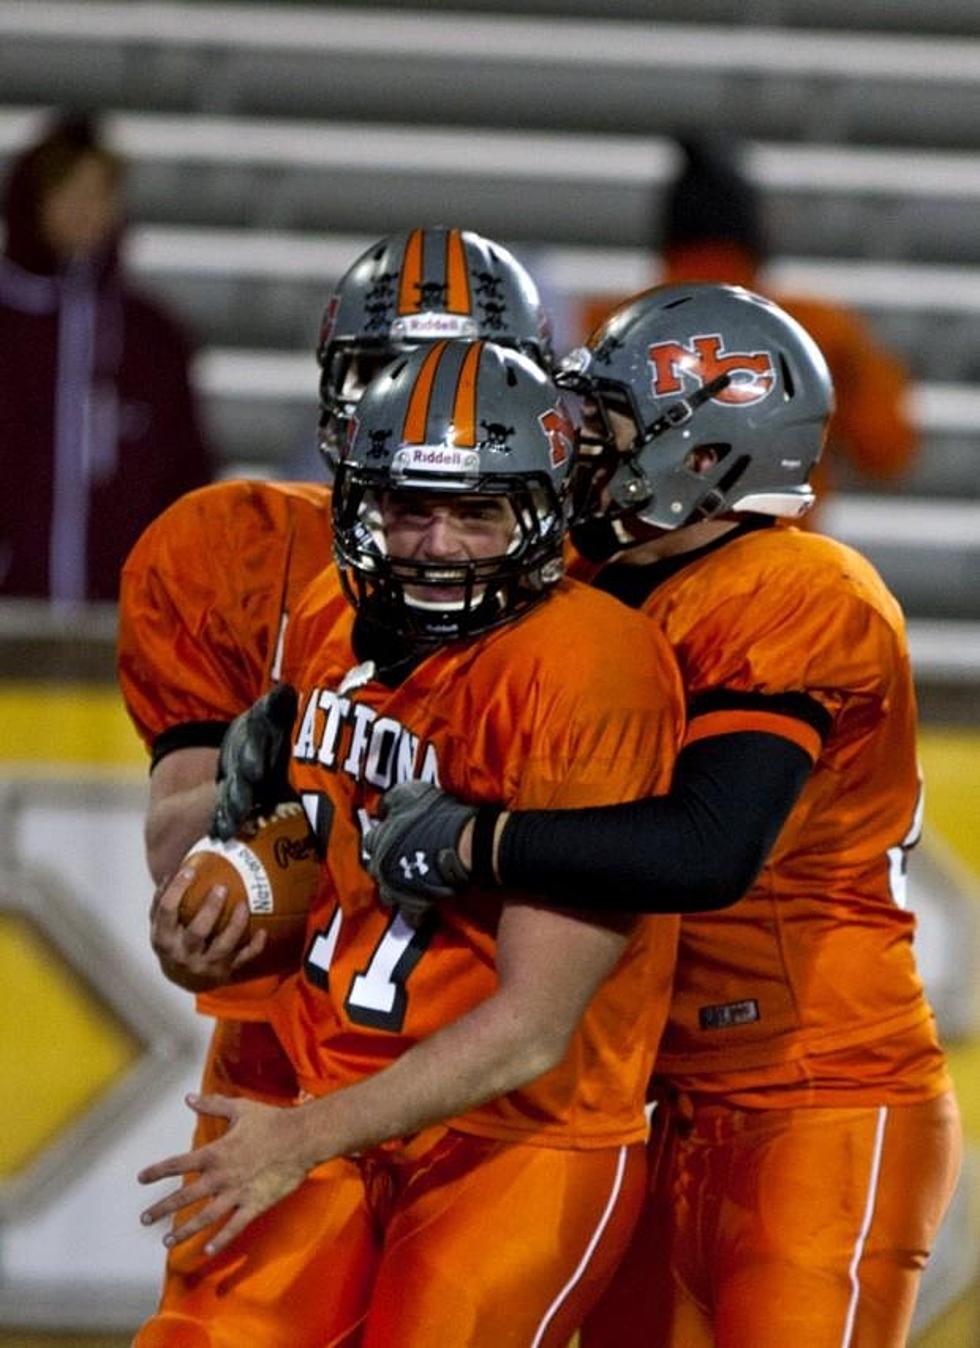 Natrona Mustangs Hold Home Opener Tonight And Invite You To “Live Orange” And “Grant A Wish”